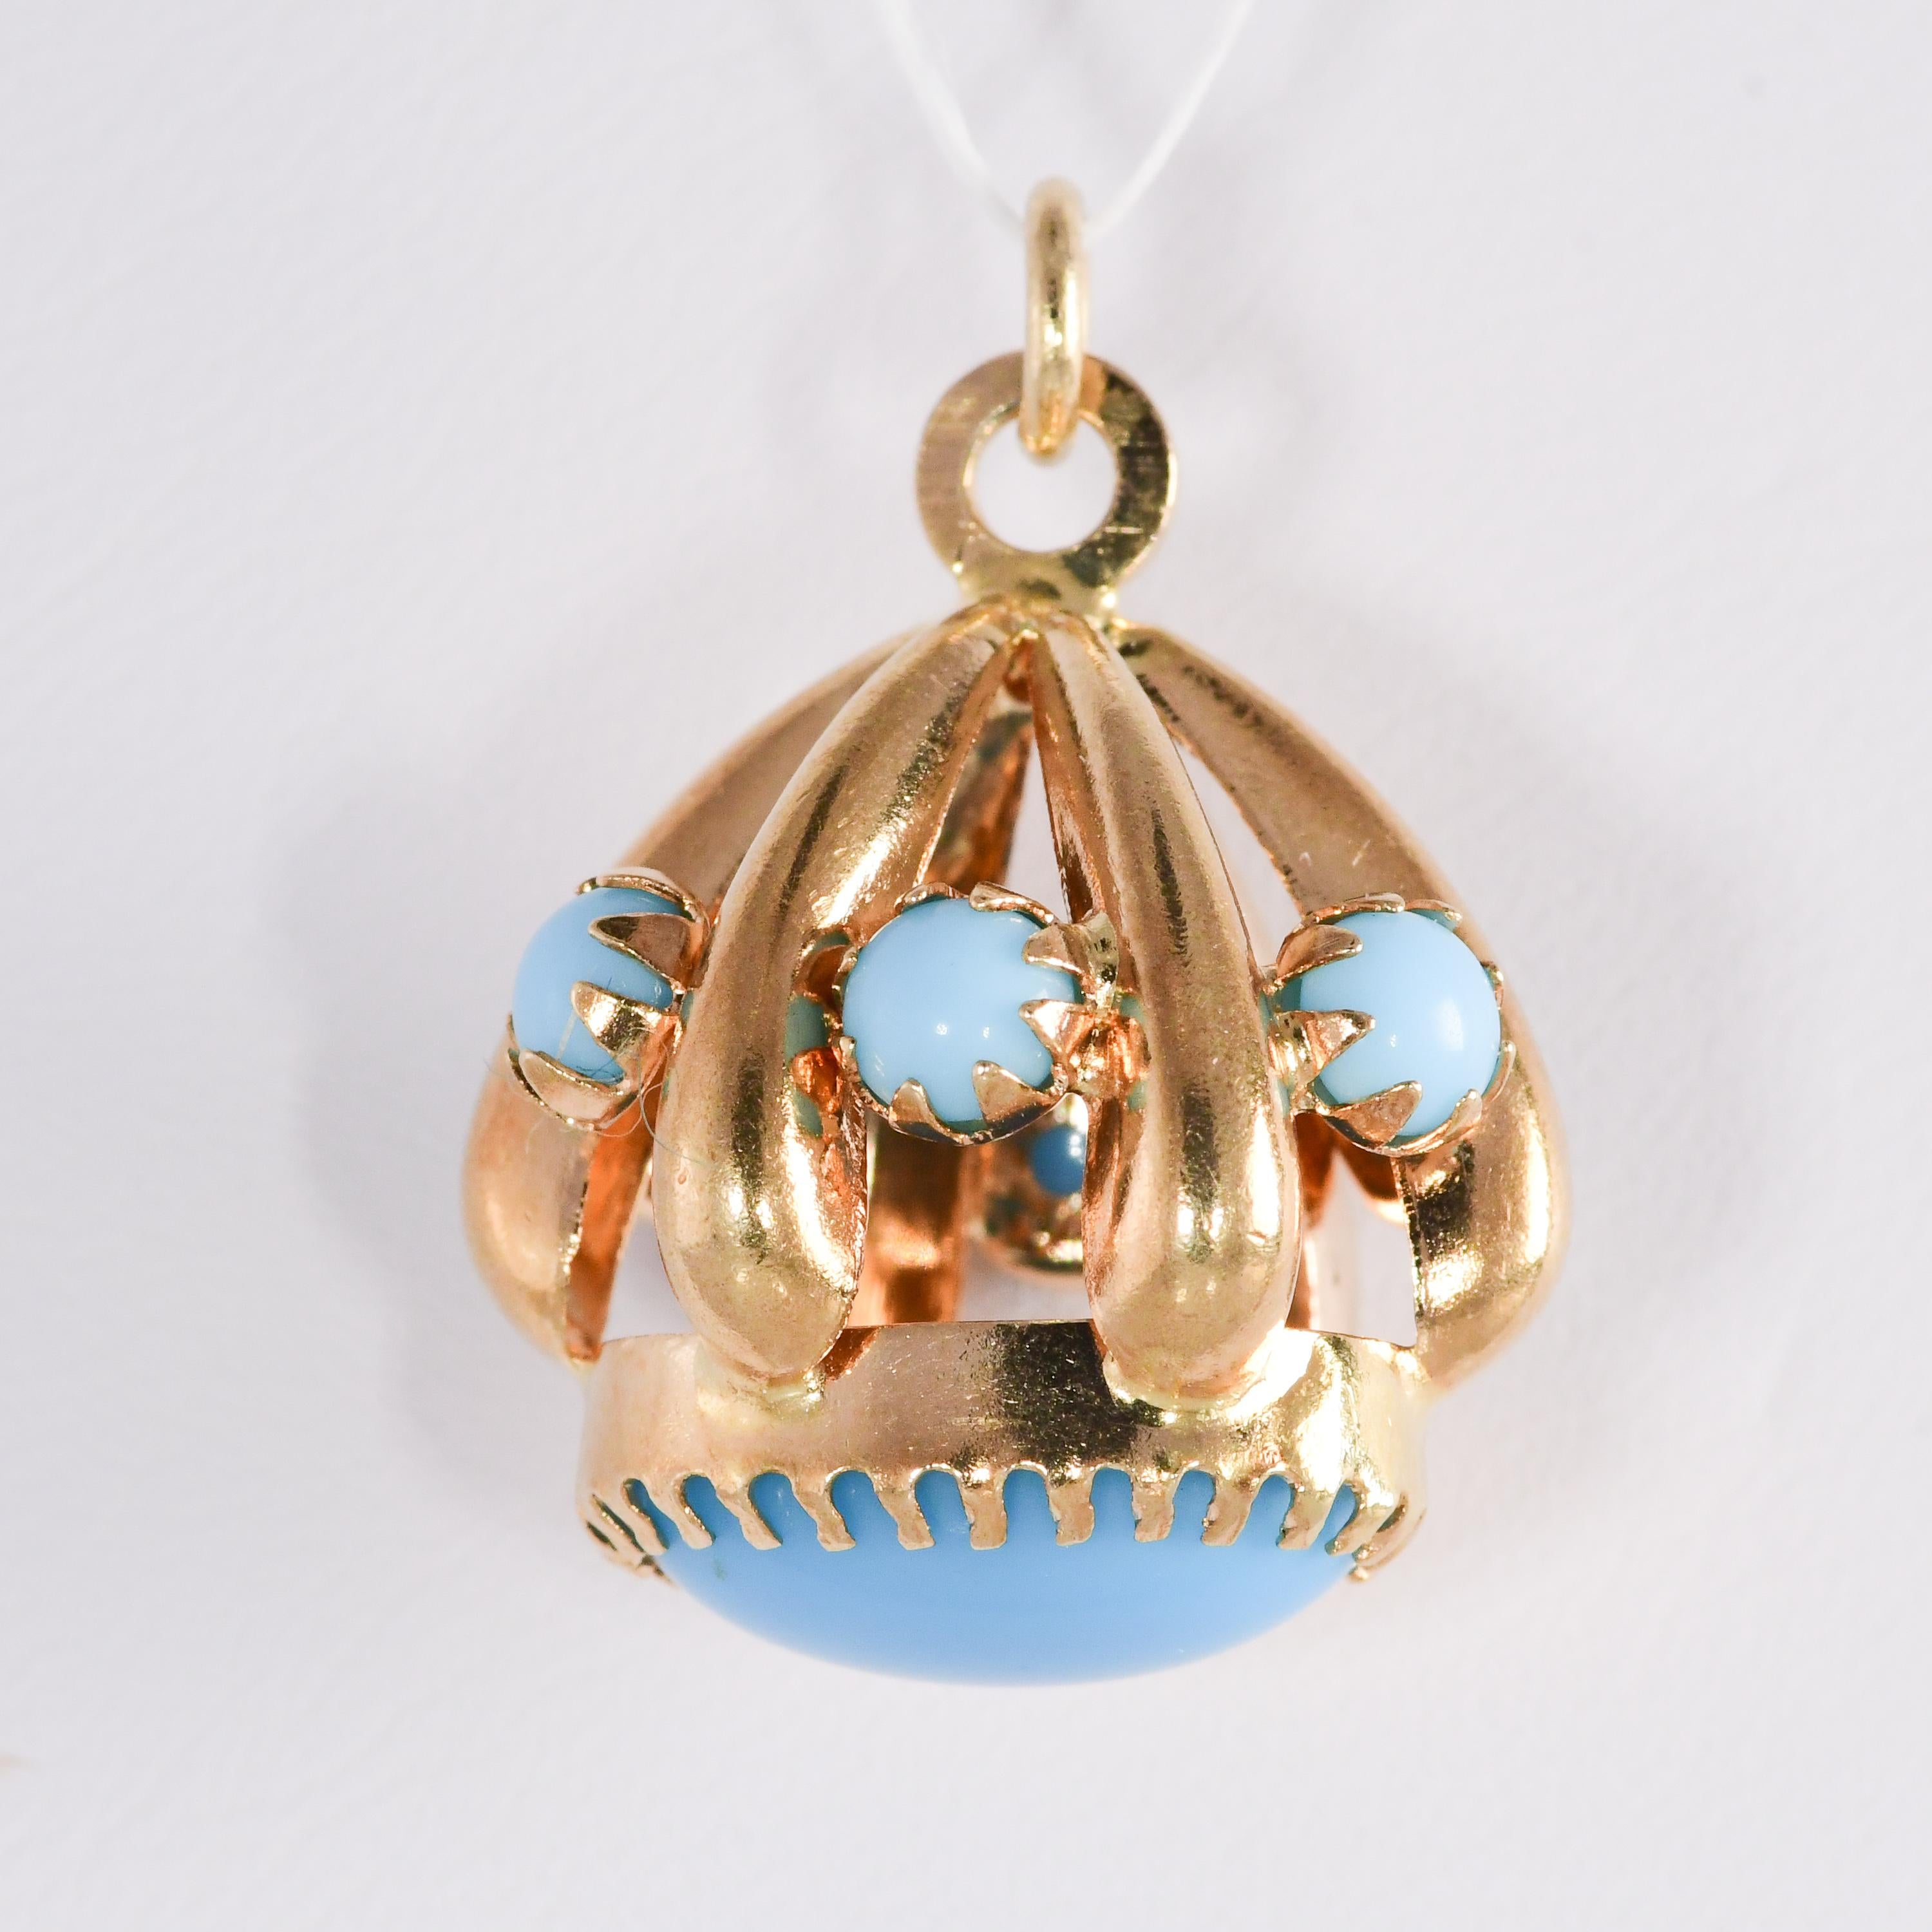 Contemporary Vintage Three-Dimensional Natural Turquoise Gold 18 Karat Charm or Pendant